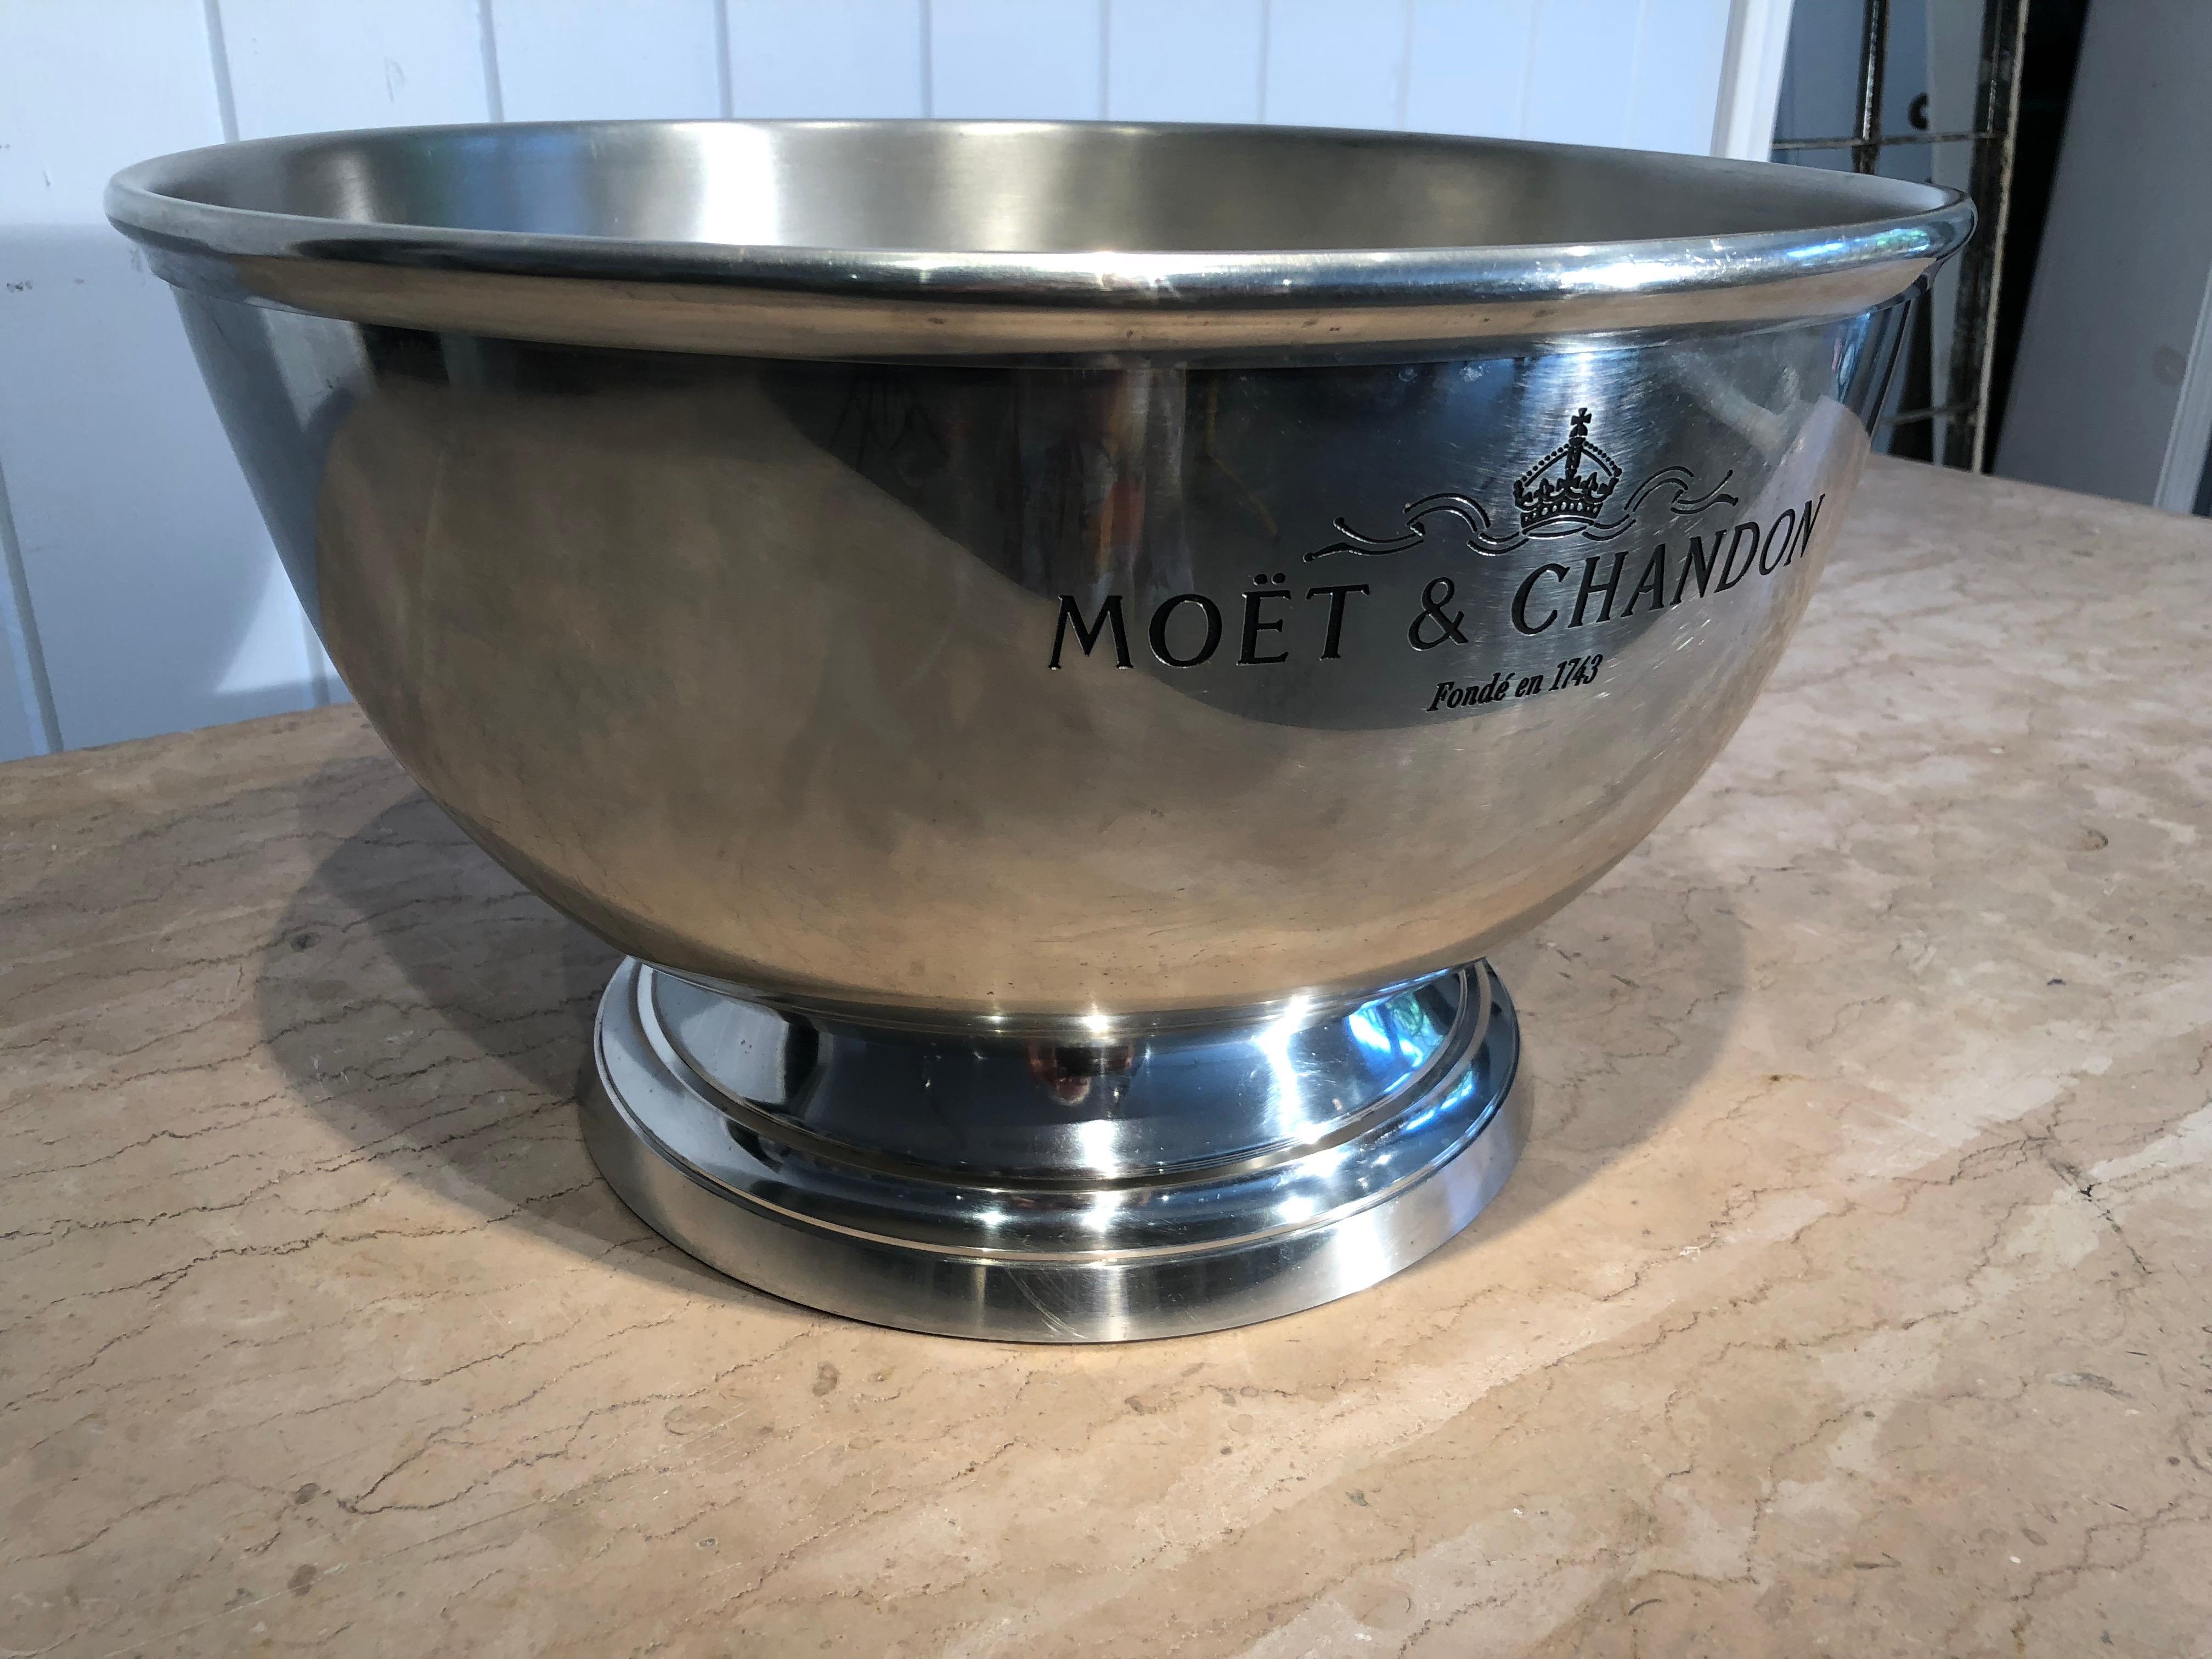 This stunning and very large round champagne cooler is made of stainless steel and signed on the bottom. The Moet et Chandon logo is inscribed on the front and back sides of the cooler. It is sufficiently large to hold at least 6 bottles of whatever